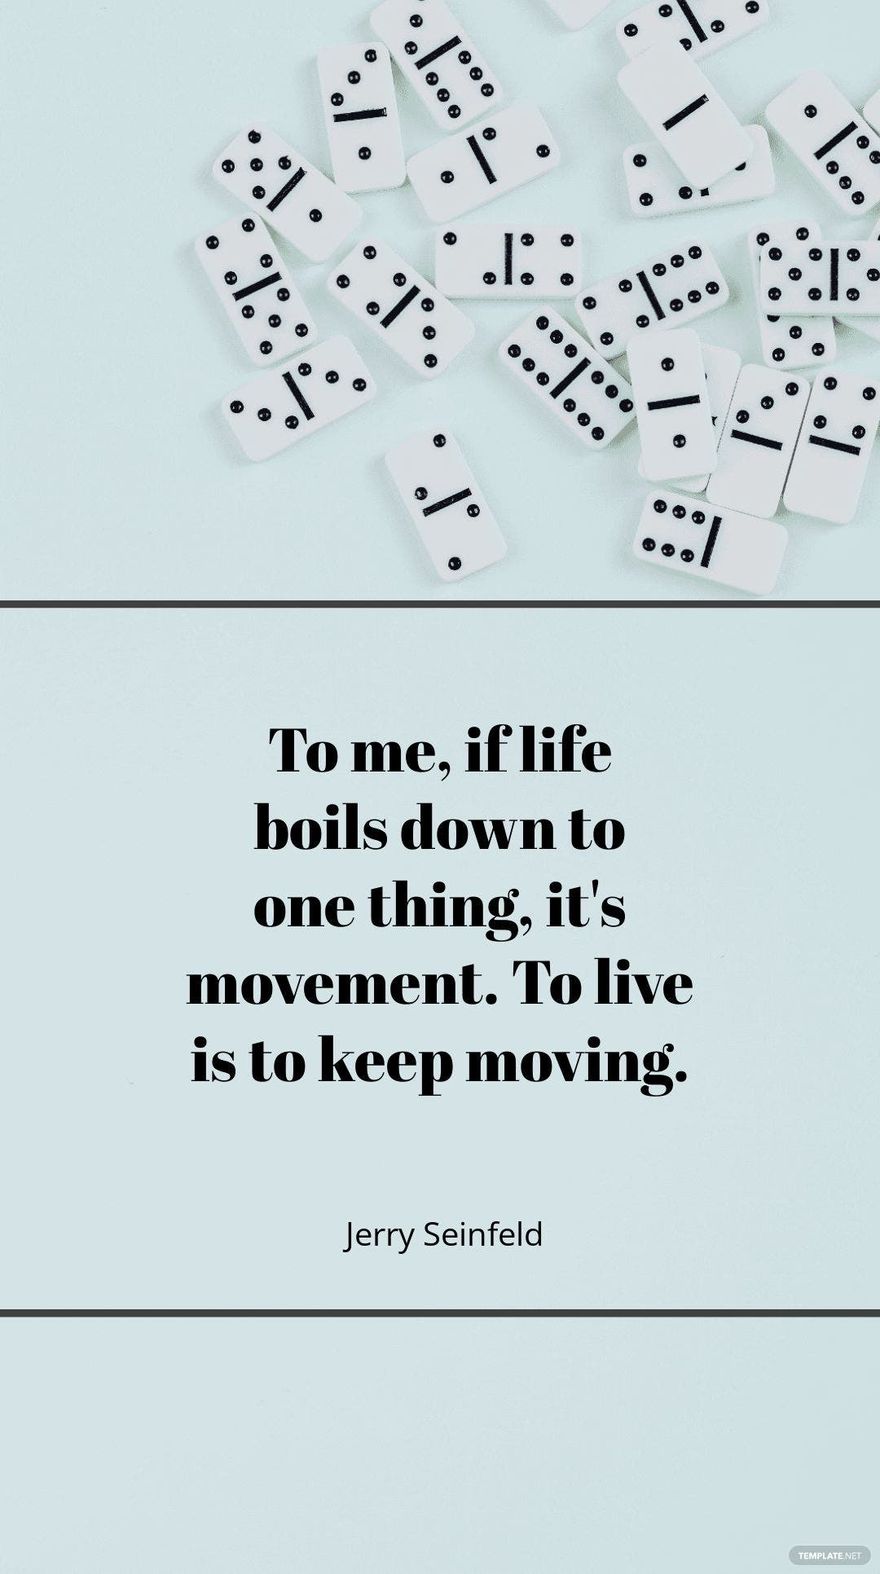 Jerry Seinfeld - "To me, if life boils down to one thing, it's movement. To live is to keep moving."